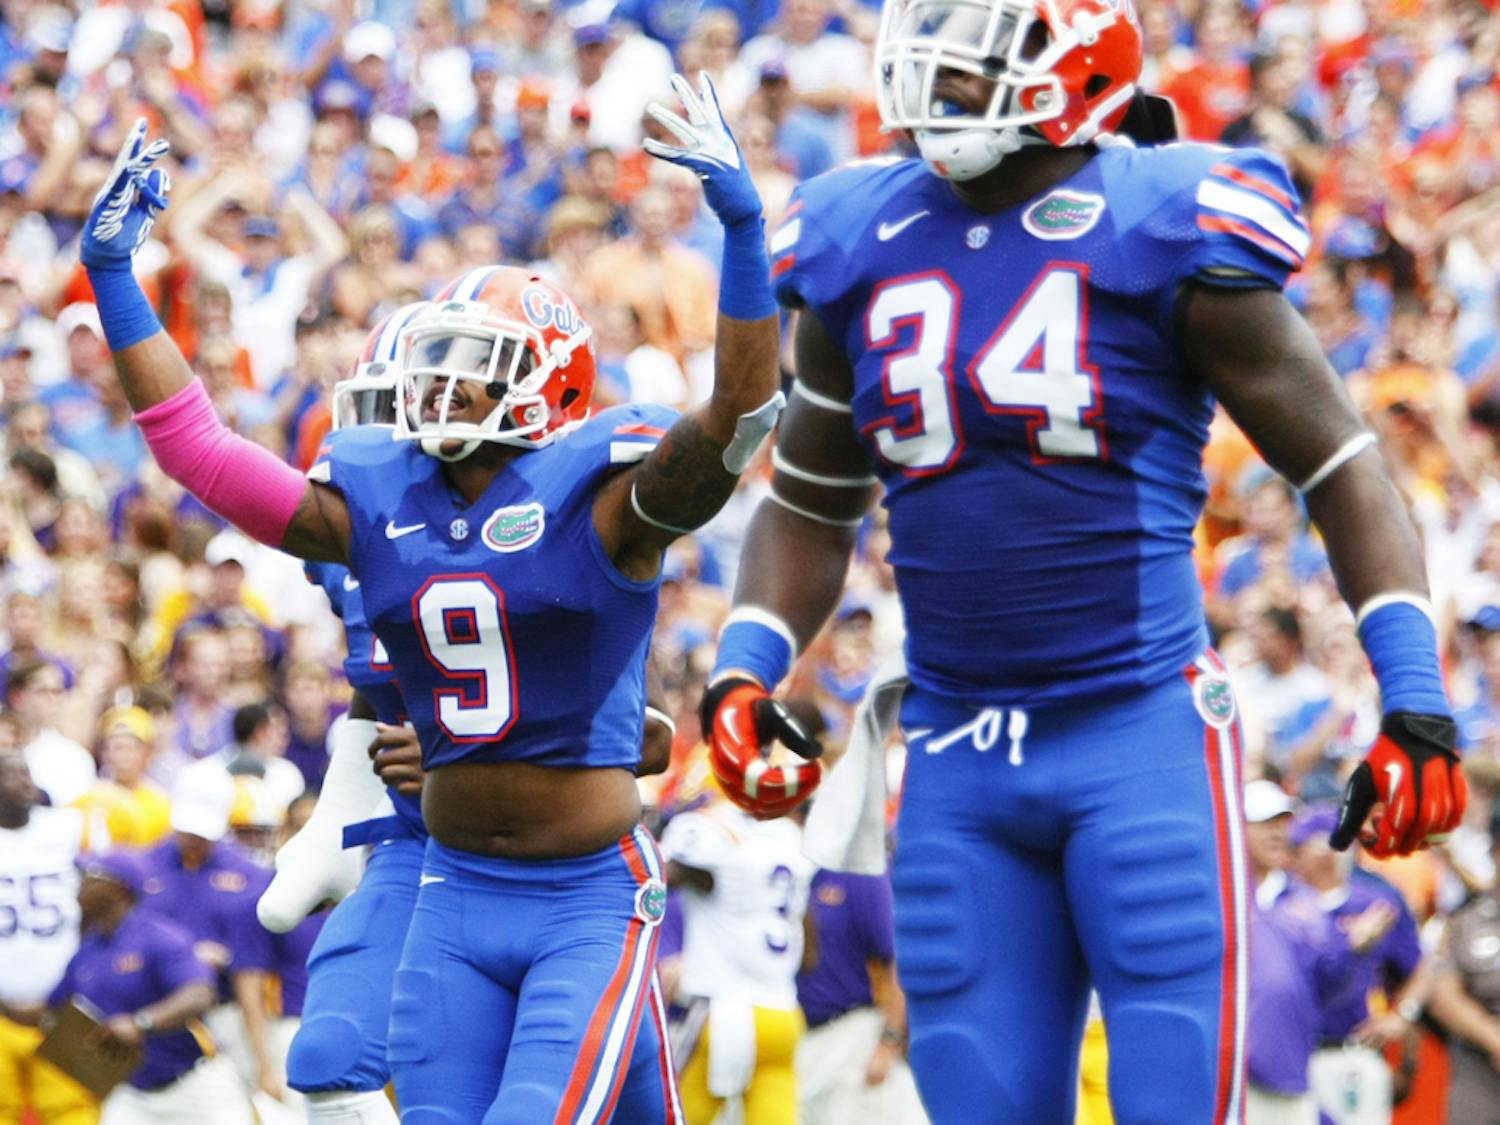 Senior safety Josh Evans (9) and redshirt senior linebacker Lerentee McCray (34) celebrate after making a stop during Florida's 14-6 win against LSU on Oct. 6.